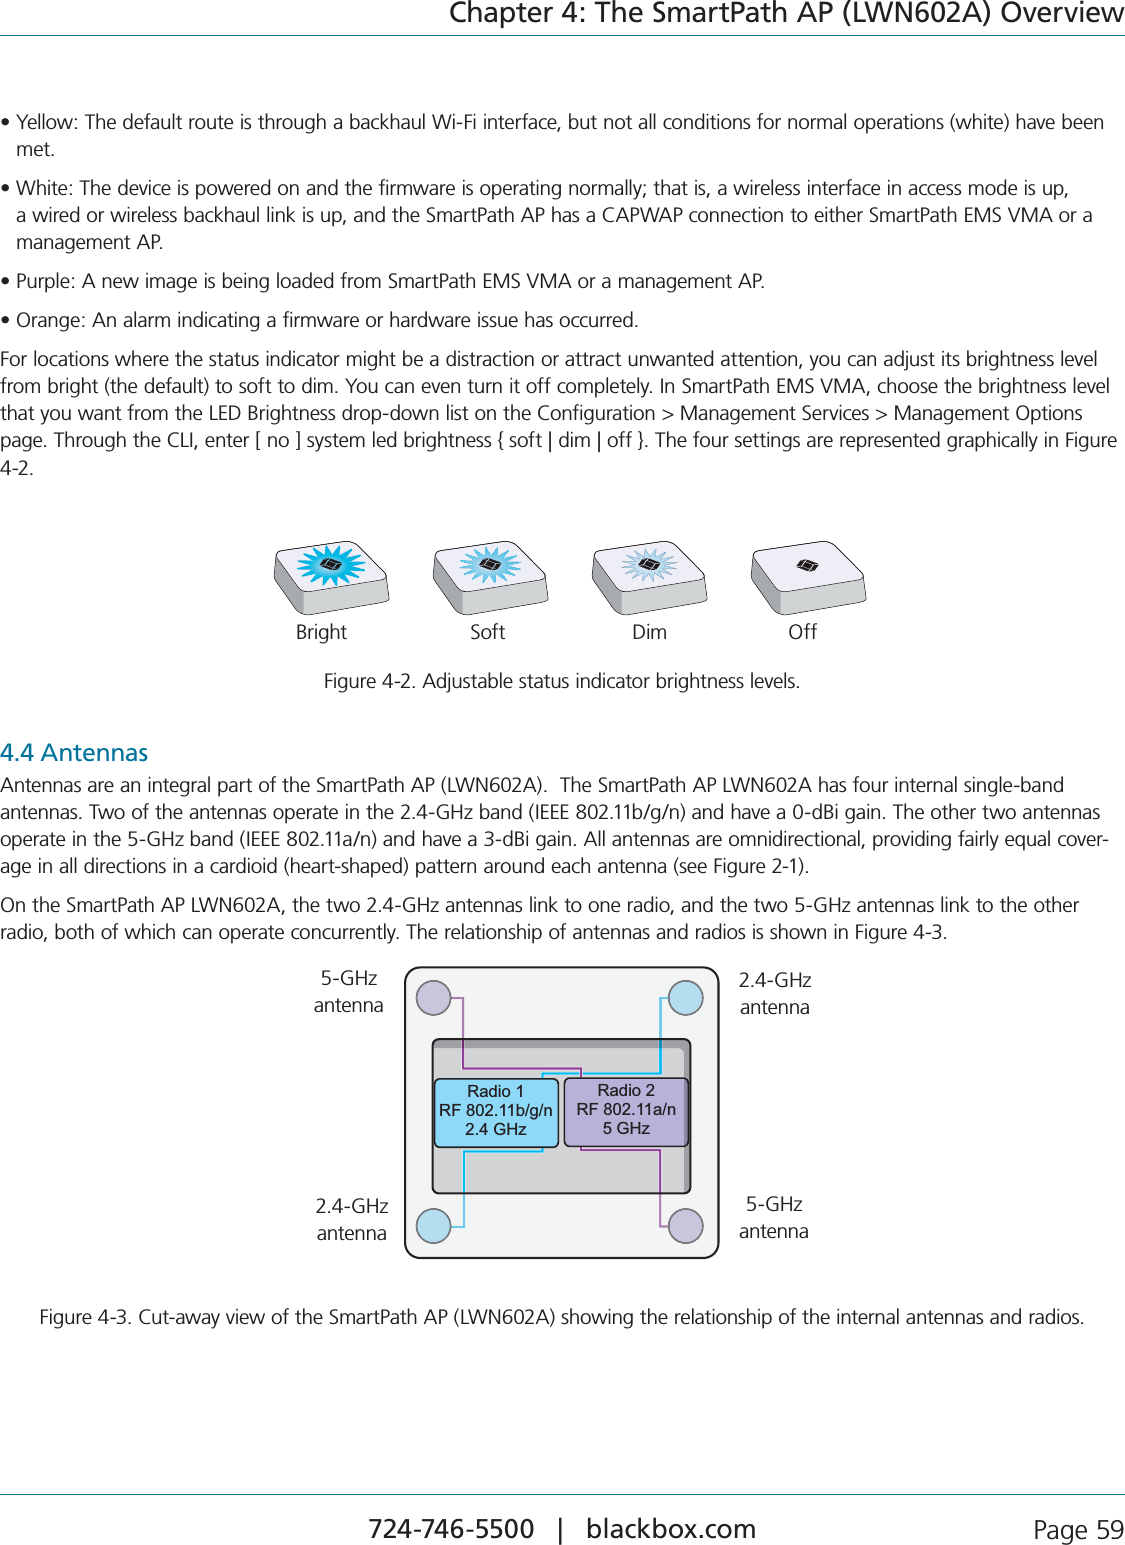 724-746-5500   |   blackbox.com  Page 59Chapter 4: The SmartPath AP (LWN602A) Overviews9ELLOW4HEDEFAULTROUTEISTHROUGHABACKHAUL7I&amp;IINTERFACEBUTNOTALLCONDITIONSFORNORMALOPERATIONSWHITEHAVEBEENmet.s7HITE4HEDEVICEISPOWEREDONANDTHEFIRMWAREISOPERATINGNORMALLYTHATISAWIRELESSINTERFACEINACCESSMODEISUP AWIREDORWIRELESSBACKHAULLINKISUPANDTHE3MART0ATH!0HASA#!07!0CONNECTIONTOEITHER3MART0ATH%-36-!ORA management AP.s0URPLE!NEWIMAGEISBEINGLOADEDFROM3MART0ATH%-36-!ORAMANAGEMENT!0s/RANGE!NALARMINDICATINGAFIRMWAREORHARDWAREISSUEHASOCCURREDFor locations where the status indicator might be a distraction or attract unwanted attention, you can adjust its brightness level FROMBRIGHTTHEDEFAULTTOSOFTTODIM9OUCANEVENTURNITOFFCOMPLETELY)N3MART0ATH%-36-!CHOOSETHEBRIGHTNESSLEVELthat you want from the LED Brightness drop-down list on the Configuration &gt; Management Services &gt; Management Options page. Through the CLI, enter [ no ] system led brightness { soft | dim | off }. The four settings are represented graphically in Figure 4-2.Bright Soft Dim OffBright        Soft          Dim          OffFigure 4-2. Adjustable status indicator brightness levels.4.4 AntennasAntennas are an integral part of the SmartPath AP (LWN602A).  The SmartPath AP LWN602A has four internal single-band ANTENNAS4WOOFTHEANTENNASOPERATEINTHE&apos;(ZBAND)%%%BGNANDHAVEAD&quot;IGAIN4HEOTHERTWOANTENNASOPERATEINTHE&apos;(ZBAND)%%%ANANDHAVEAD&quot;IGAIN!LLANTENNASAREOMNIDIRECTIONALPROVIDINGFAIRLYEQUALCOVER-age in all directions in a cardioid (heart-shaped) pattern around each antenna (see Figure 2-1).On the SmartPath AP LWN602A, the two 2.4-GHz antennas link to one radio, and the two 5-GHz antennas link to the other radio, both of which can operate concurrently. The relationship of antennas and radios is shown in Figure 4-3.Radio 1RF 802.11b/g/n2.4 GHzRadio 2RF 802.11a/n5 GHz5 GHzAntenna5 GHzAntenna2.4 GHzAntenna2.4 GHzAntenna5-GHz antenna2.4-GHz antenna2.4-GHz antenna5-GHz antennaFigure 4-3. Cut-away view of the SmartPath AP (LWN602A) showing the relationship of the internal antennas and radios.